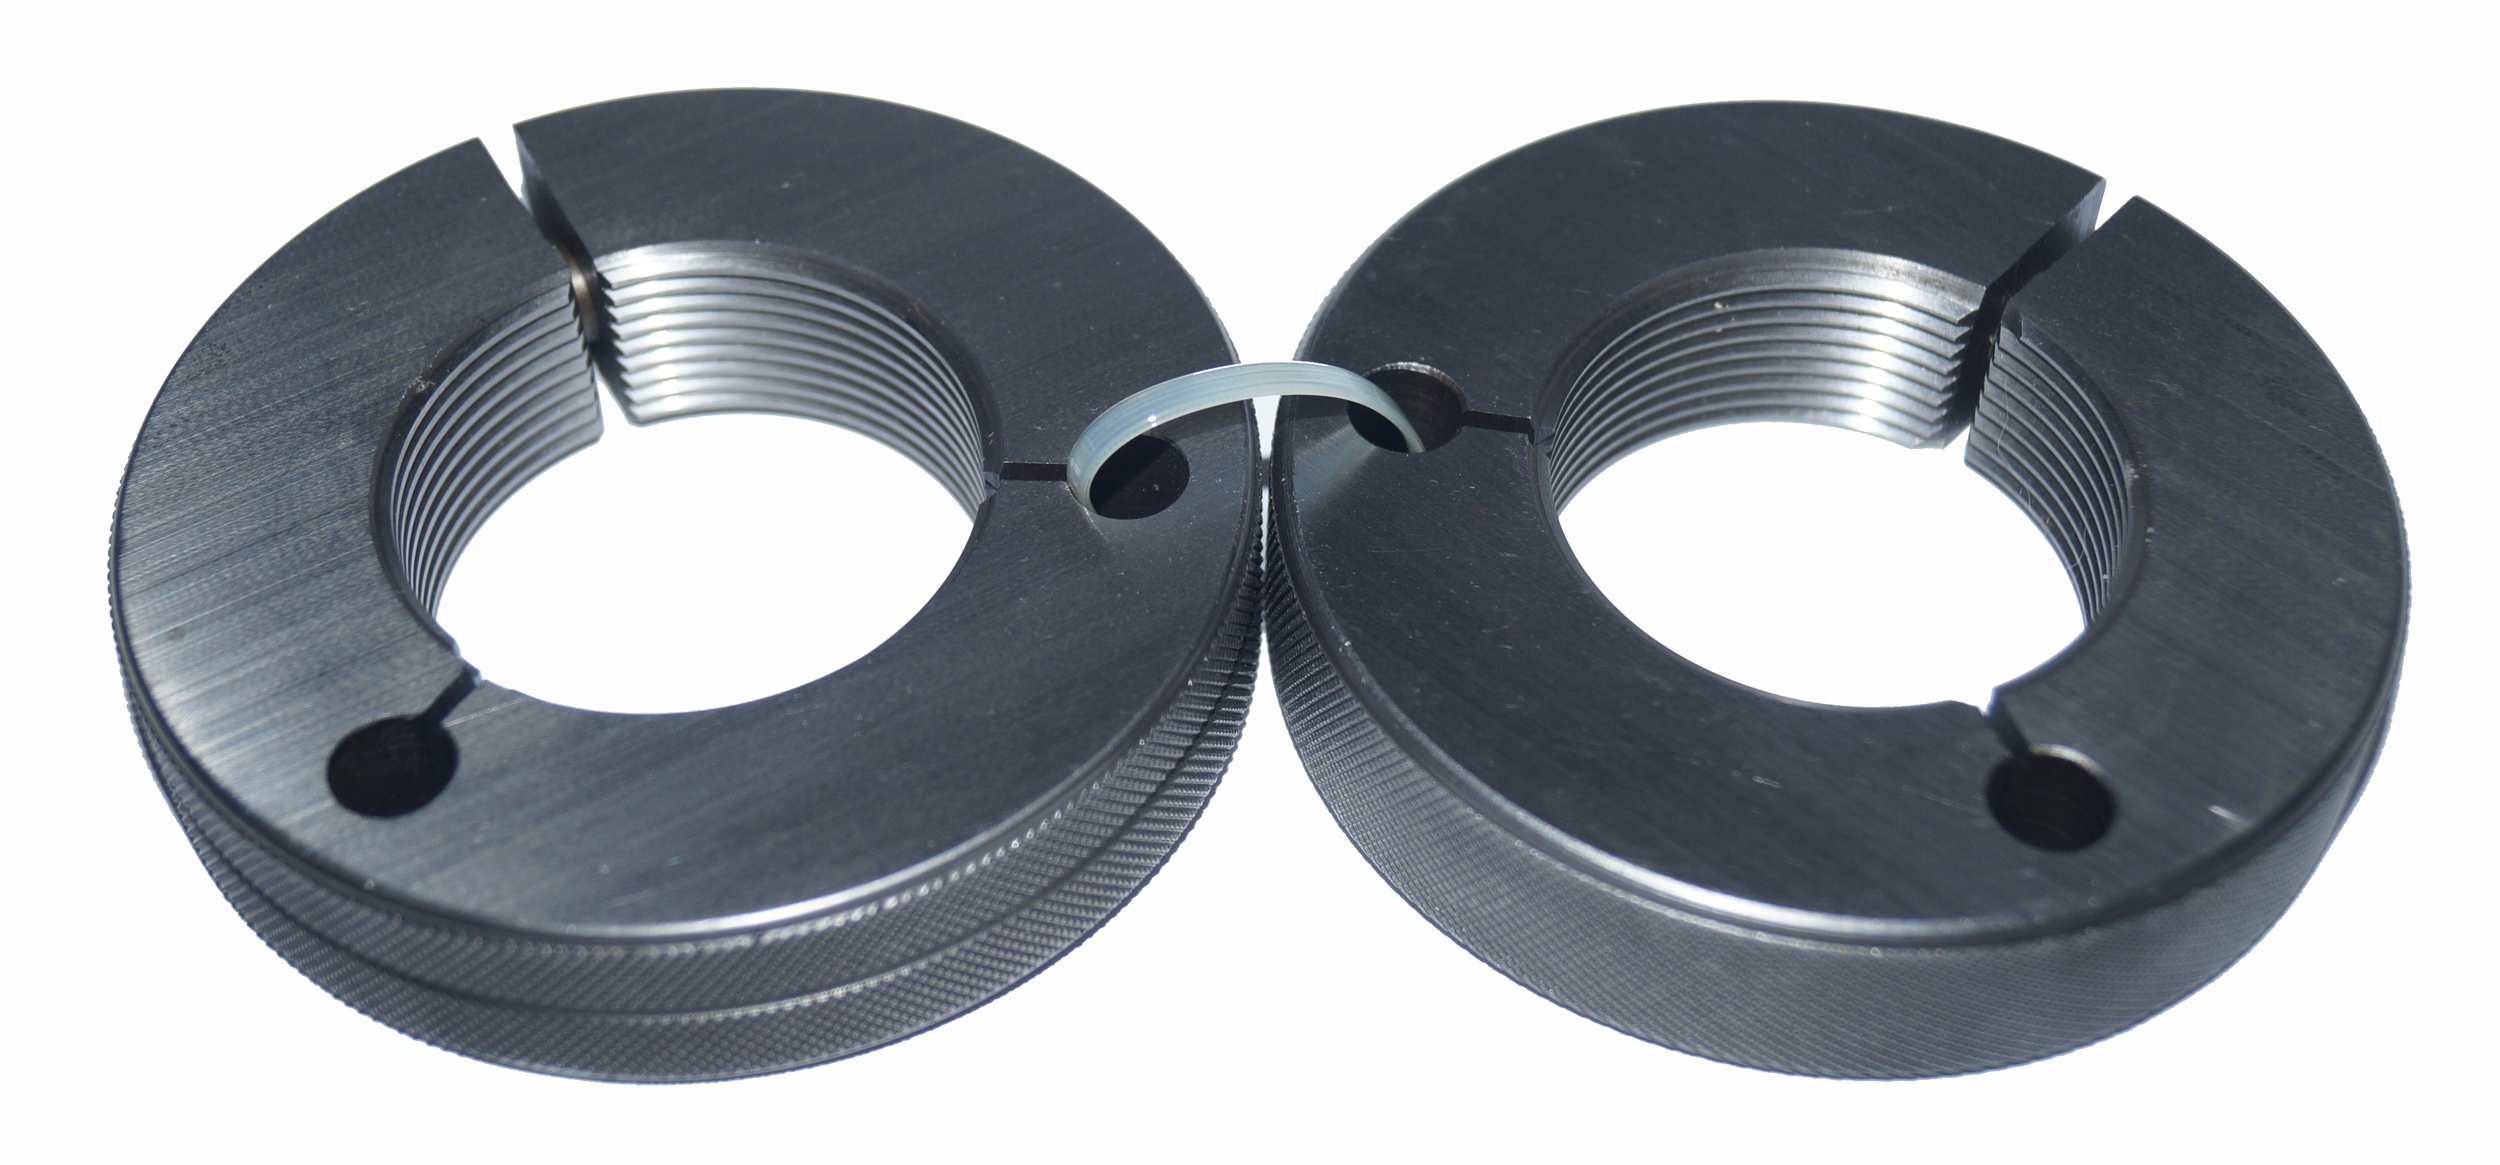 2-12 UN Thread Ring Gage 2A GO NOGO 100% Calibrated Ship by FedEx Delivery in 4 Days